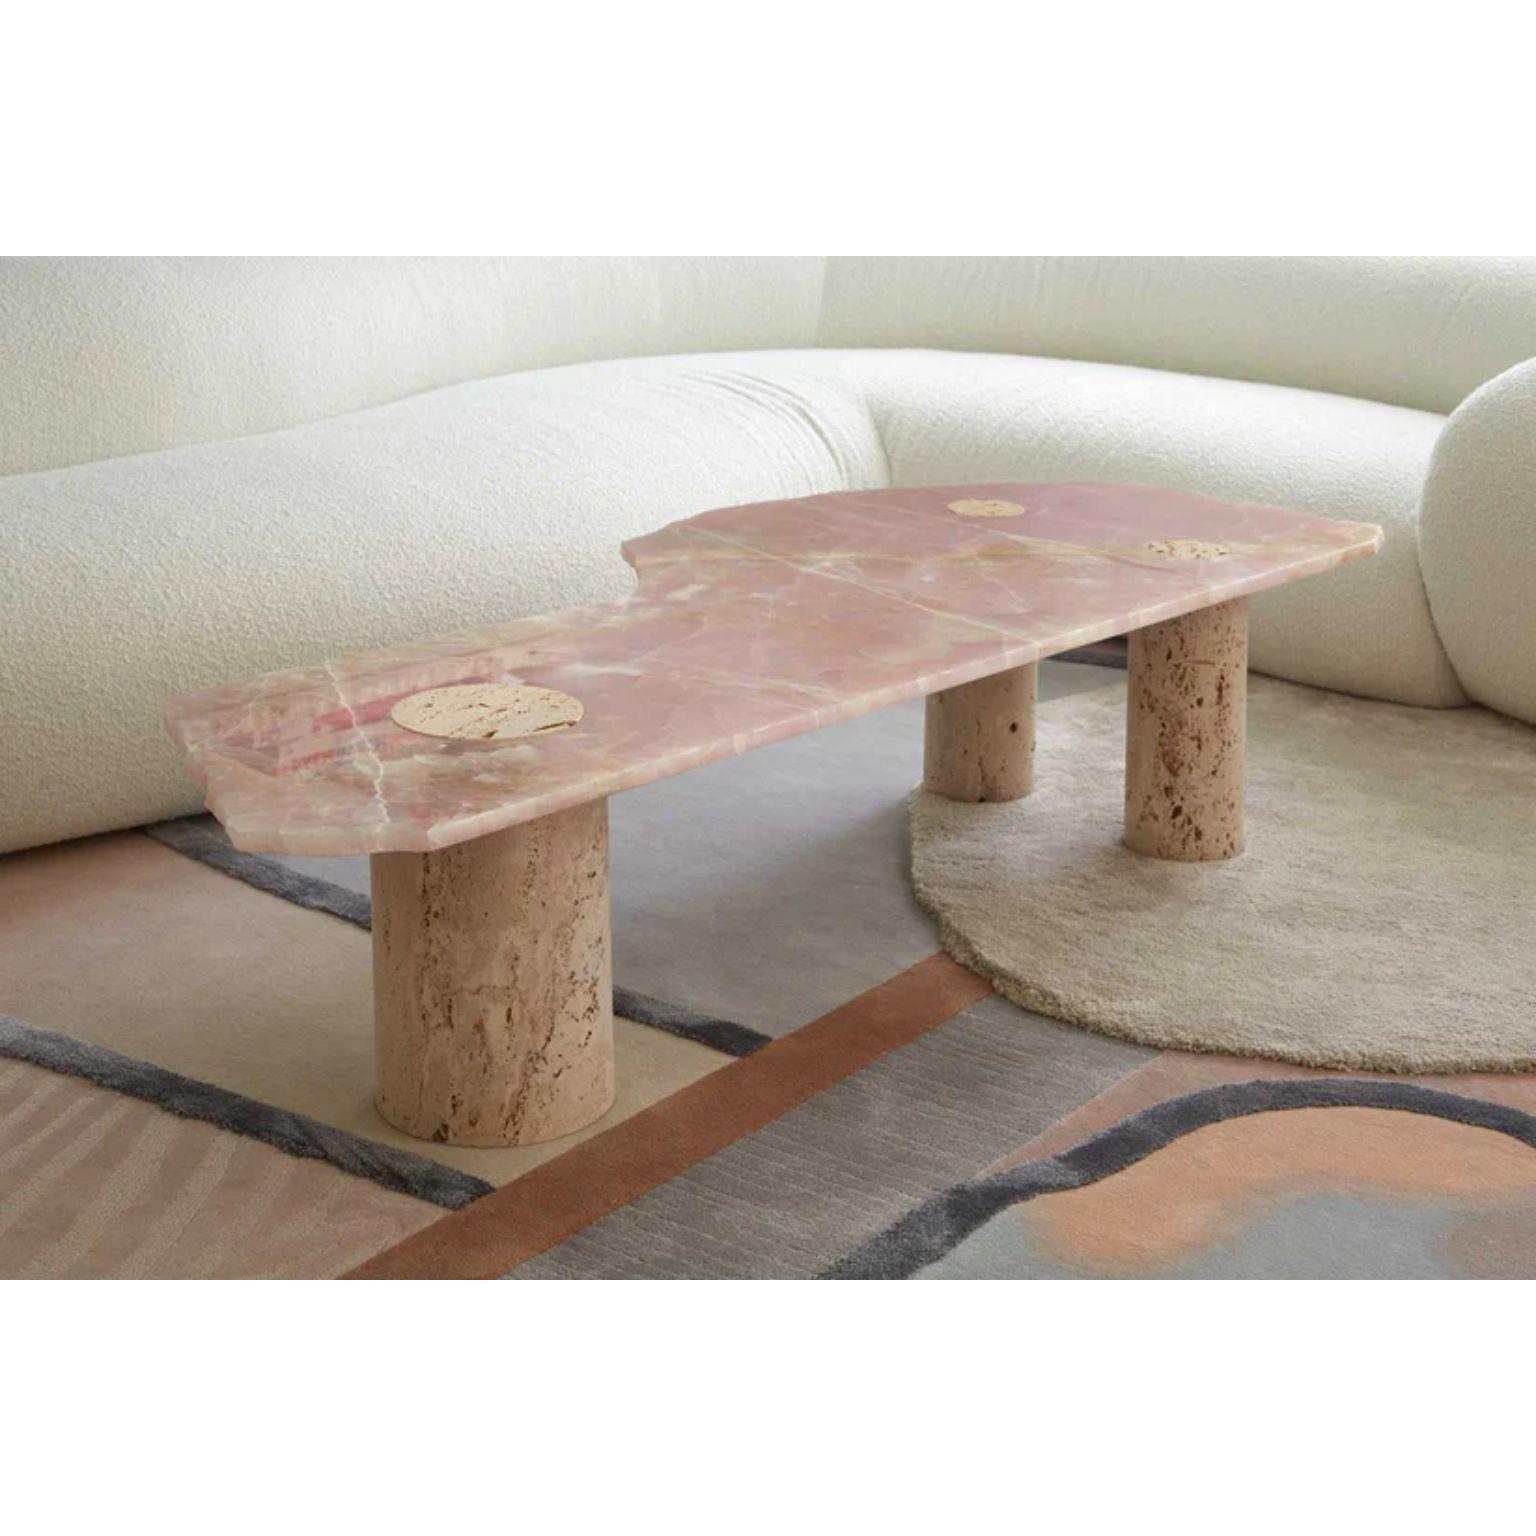 Atlas Coffee Table by Patricia Bustos de la Torre
Dimensions: D 68 x W 166 x H 40 cm.
Materials: Polish onyx and Navona travertine marble.

The Atlas Coffee table has been baptized after its resemblance with a map,
showcasing irregular edges and an